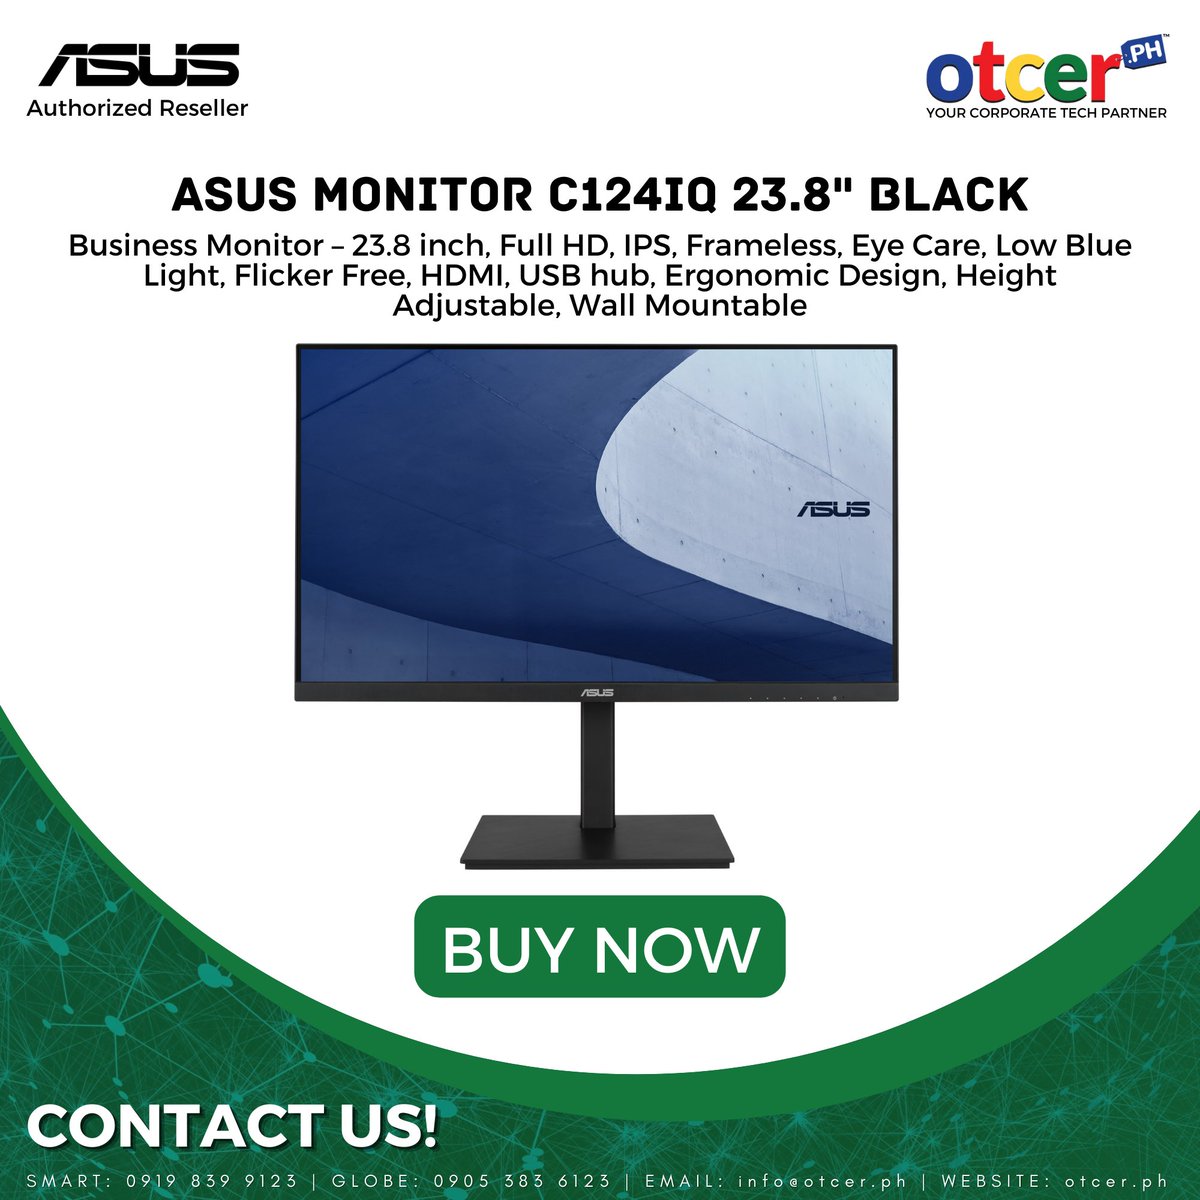 ASUS MONITOR C124IQ 23.8' BLACK

Php 9,995.00

ASUS C1241QSB Business Monitor – 23.8 inch, Full HD, IPS, Frameless, Eye Care, Low Blue Light, Flicker Free, HDMI, USB hub, Ergonomic Design, Height Adjustable, Wall Mountable

#Asus #asus #ASUSMonitor #asusmonitor #asusmonitors